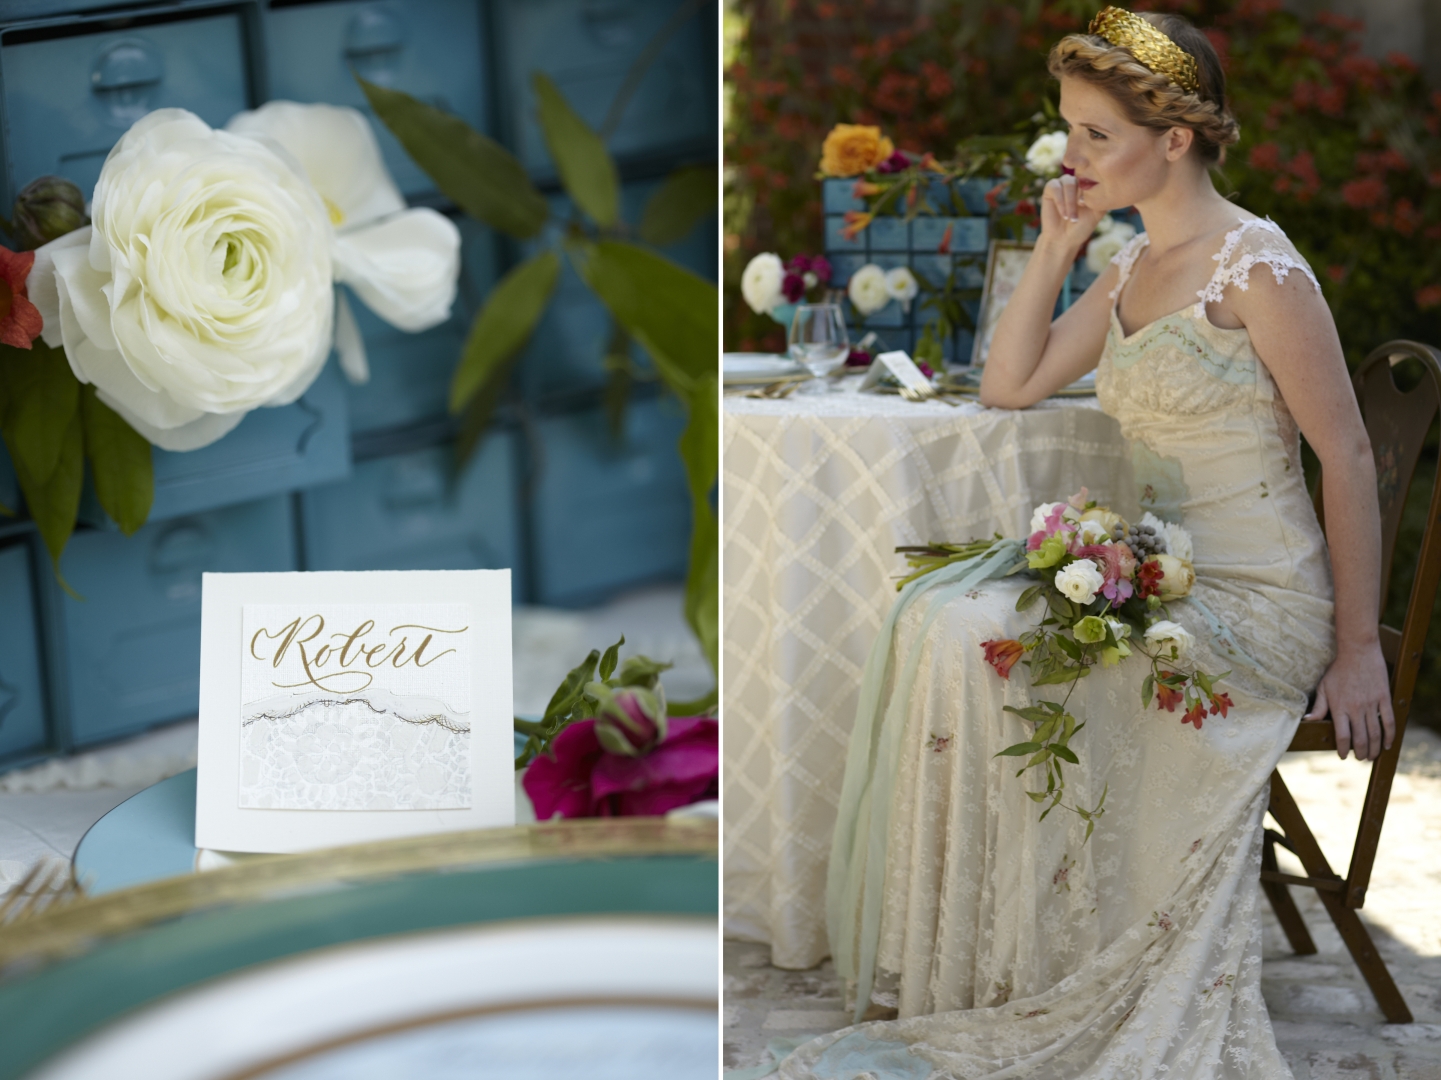 Runway to Reality Inspiration Shoot featuring Claire Pettibone's Ooh La La from Kristy Rice